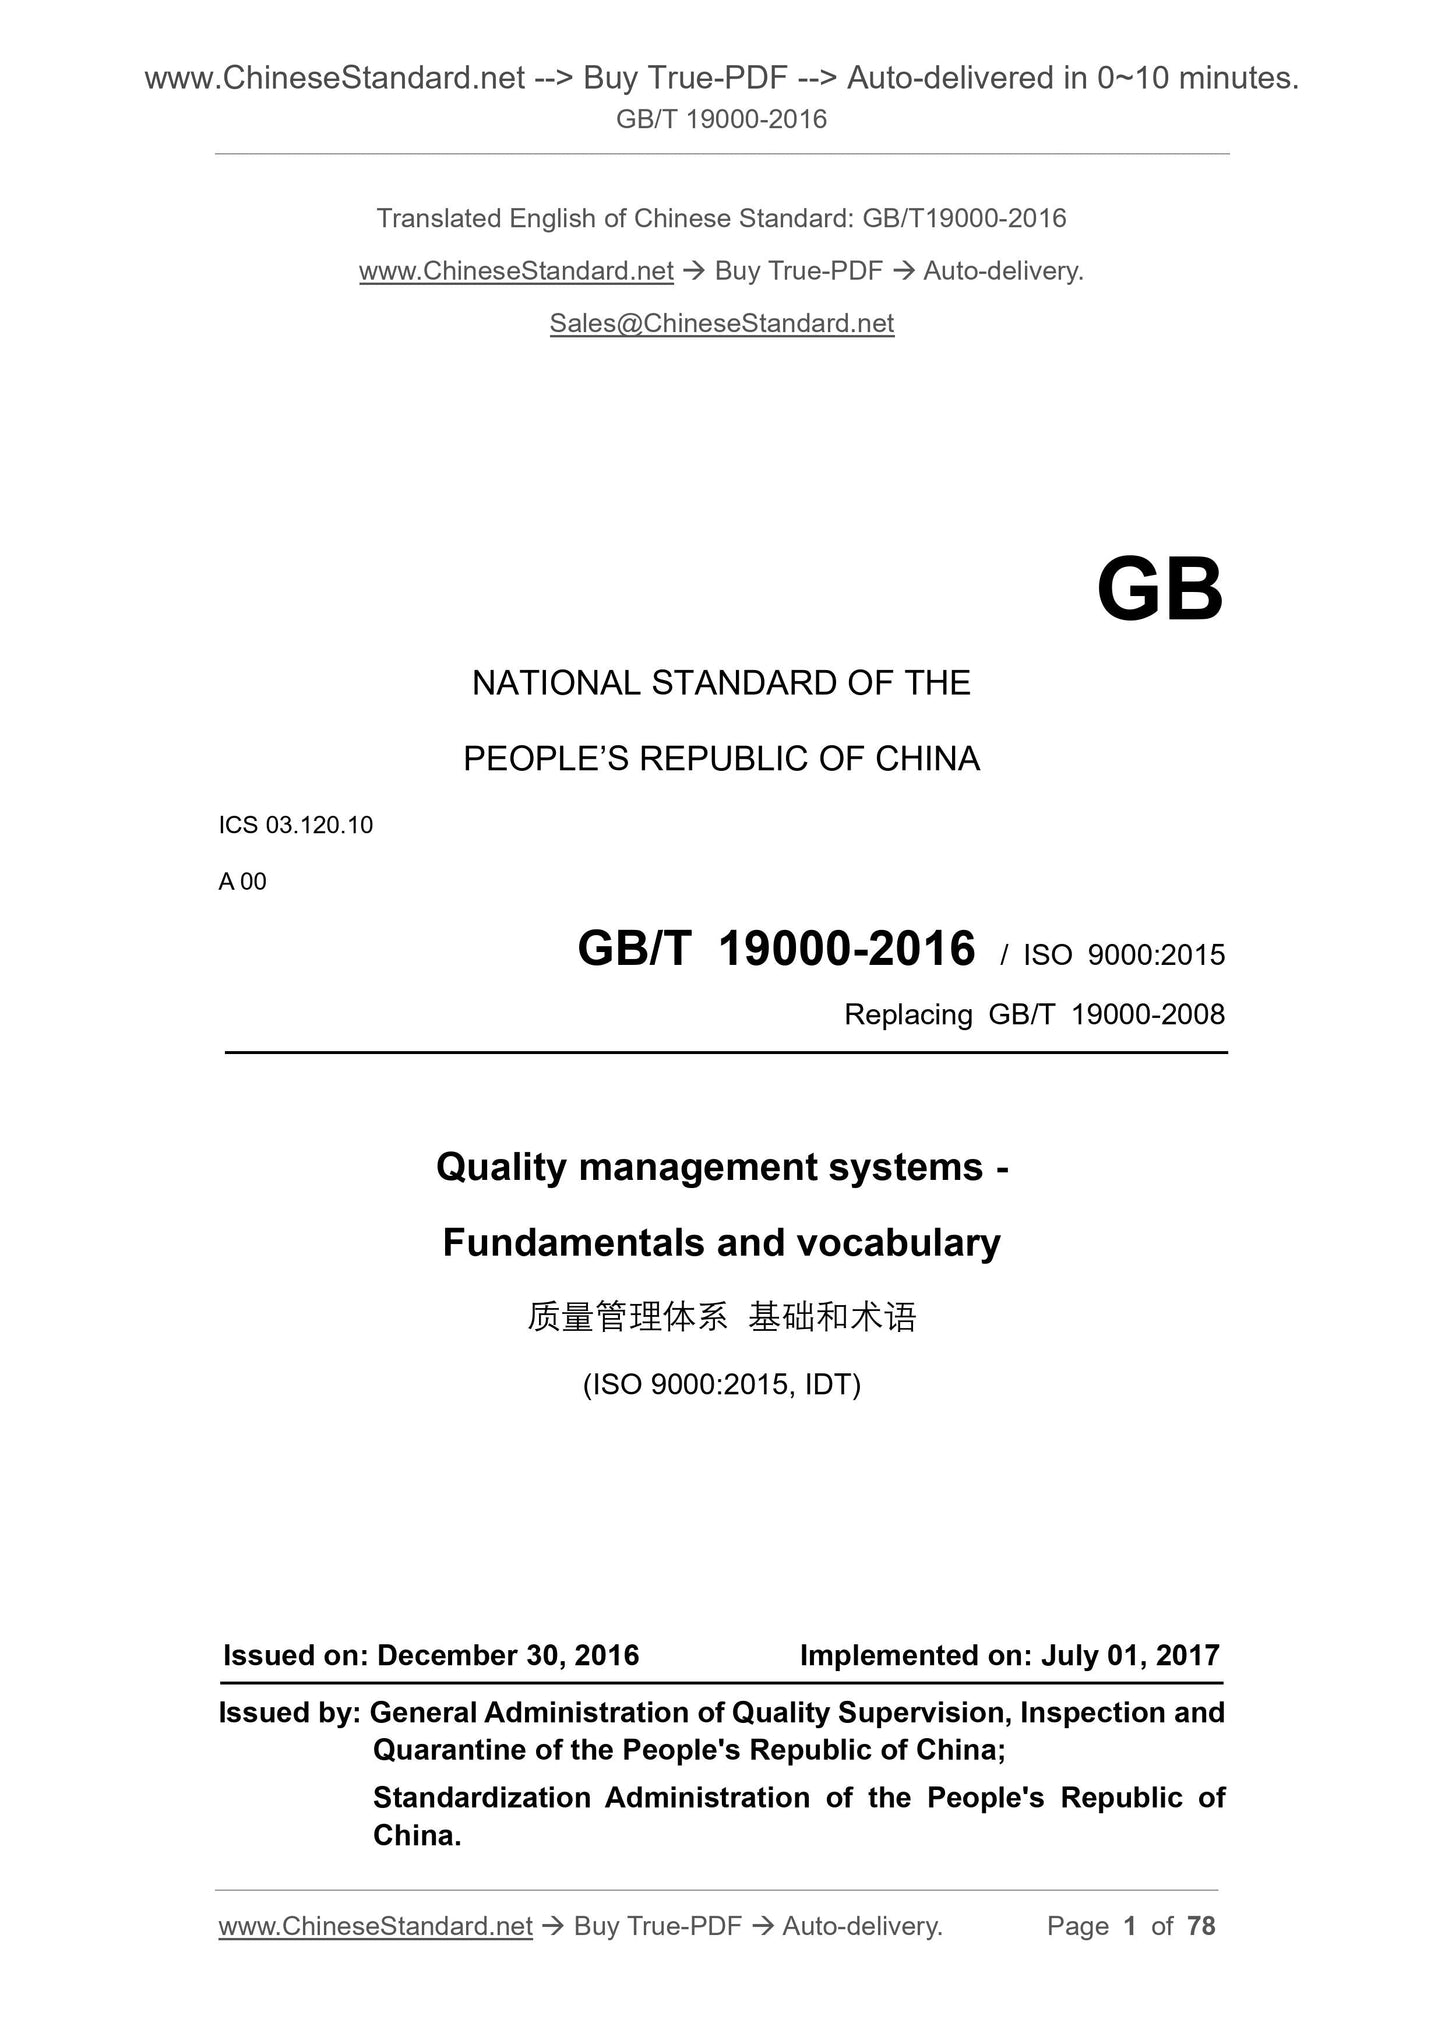 GB/T 19000-2016 Page 1